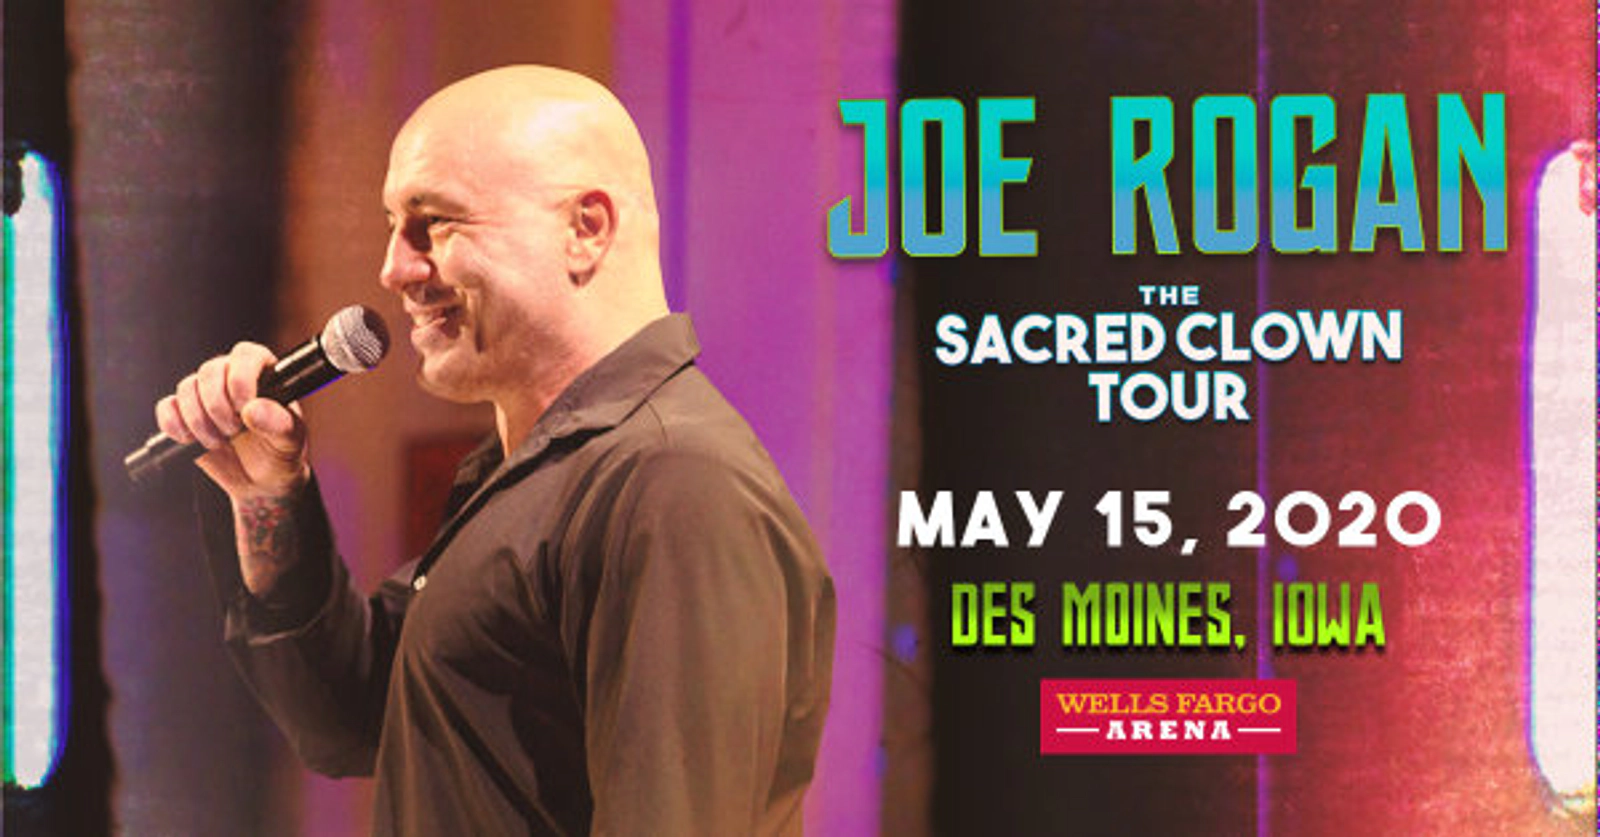 Win Tickets to Joe Rogan, 5/15 at Wells Fargo Arena, in The Bus Box Office!! - Thumbnail Image